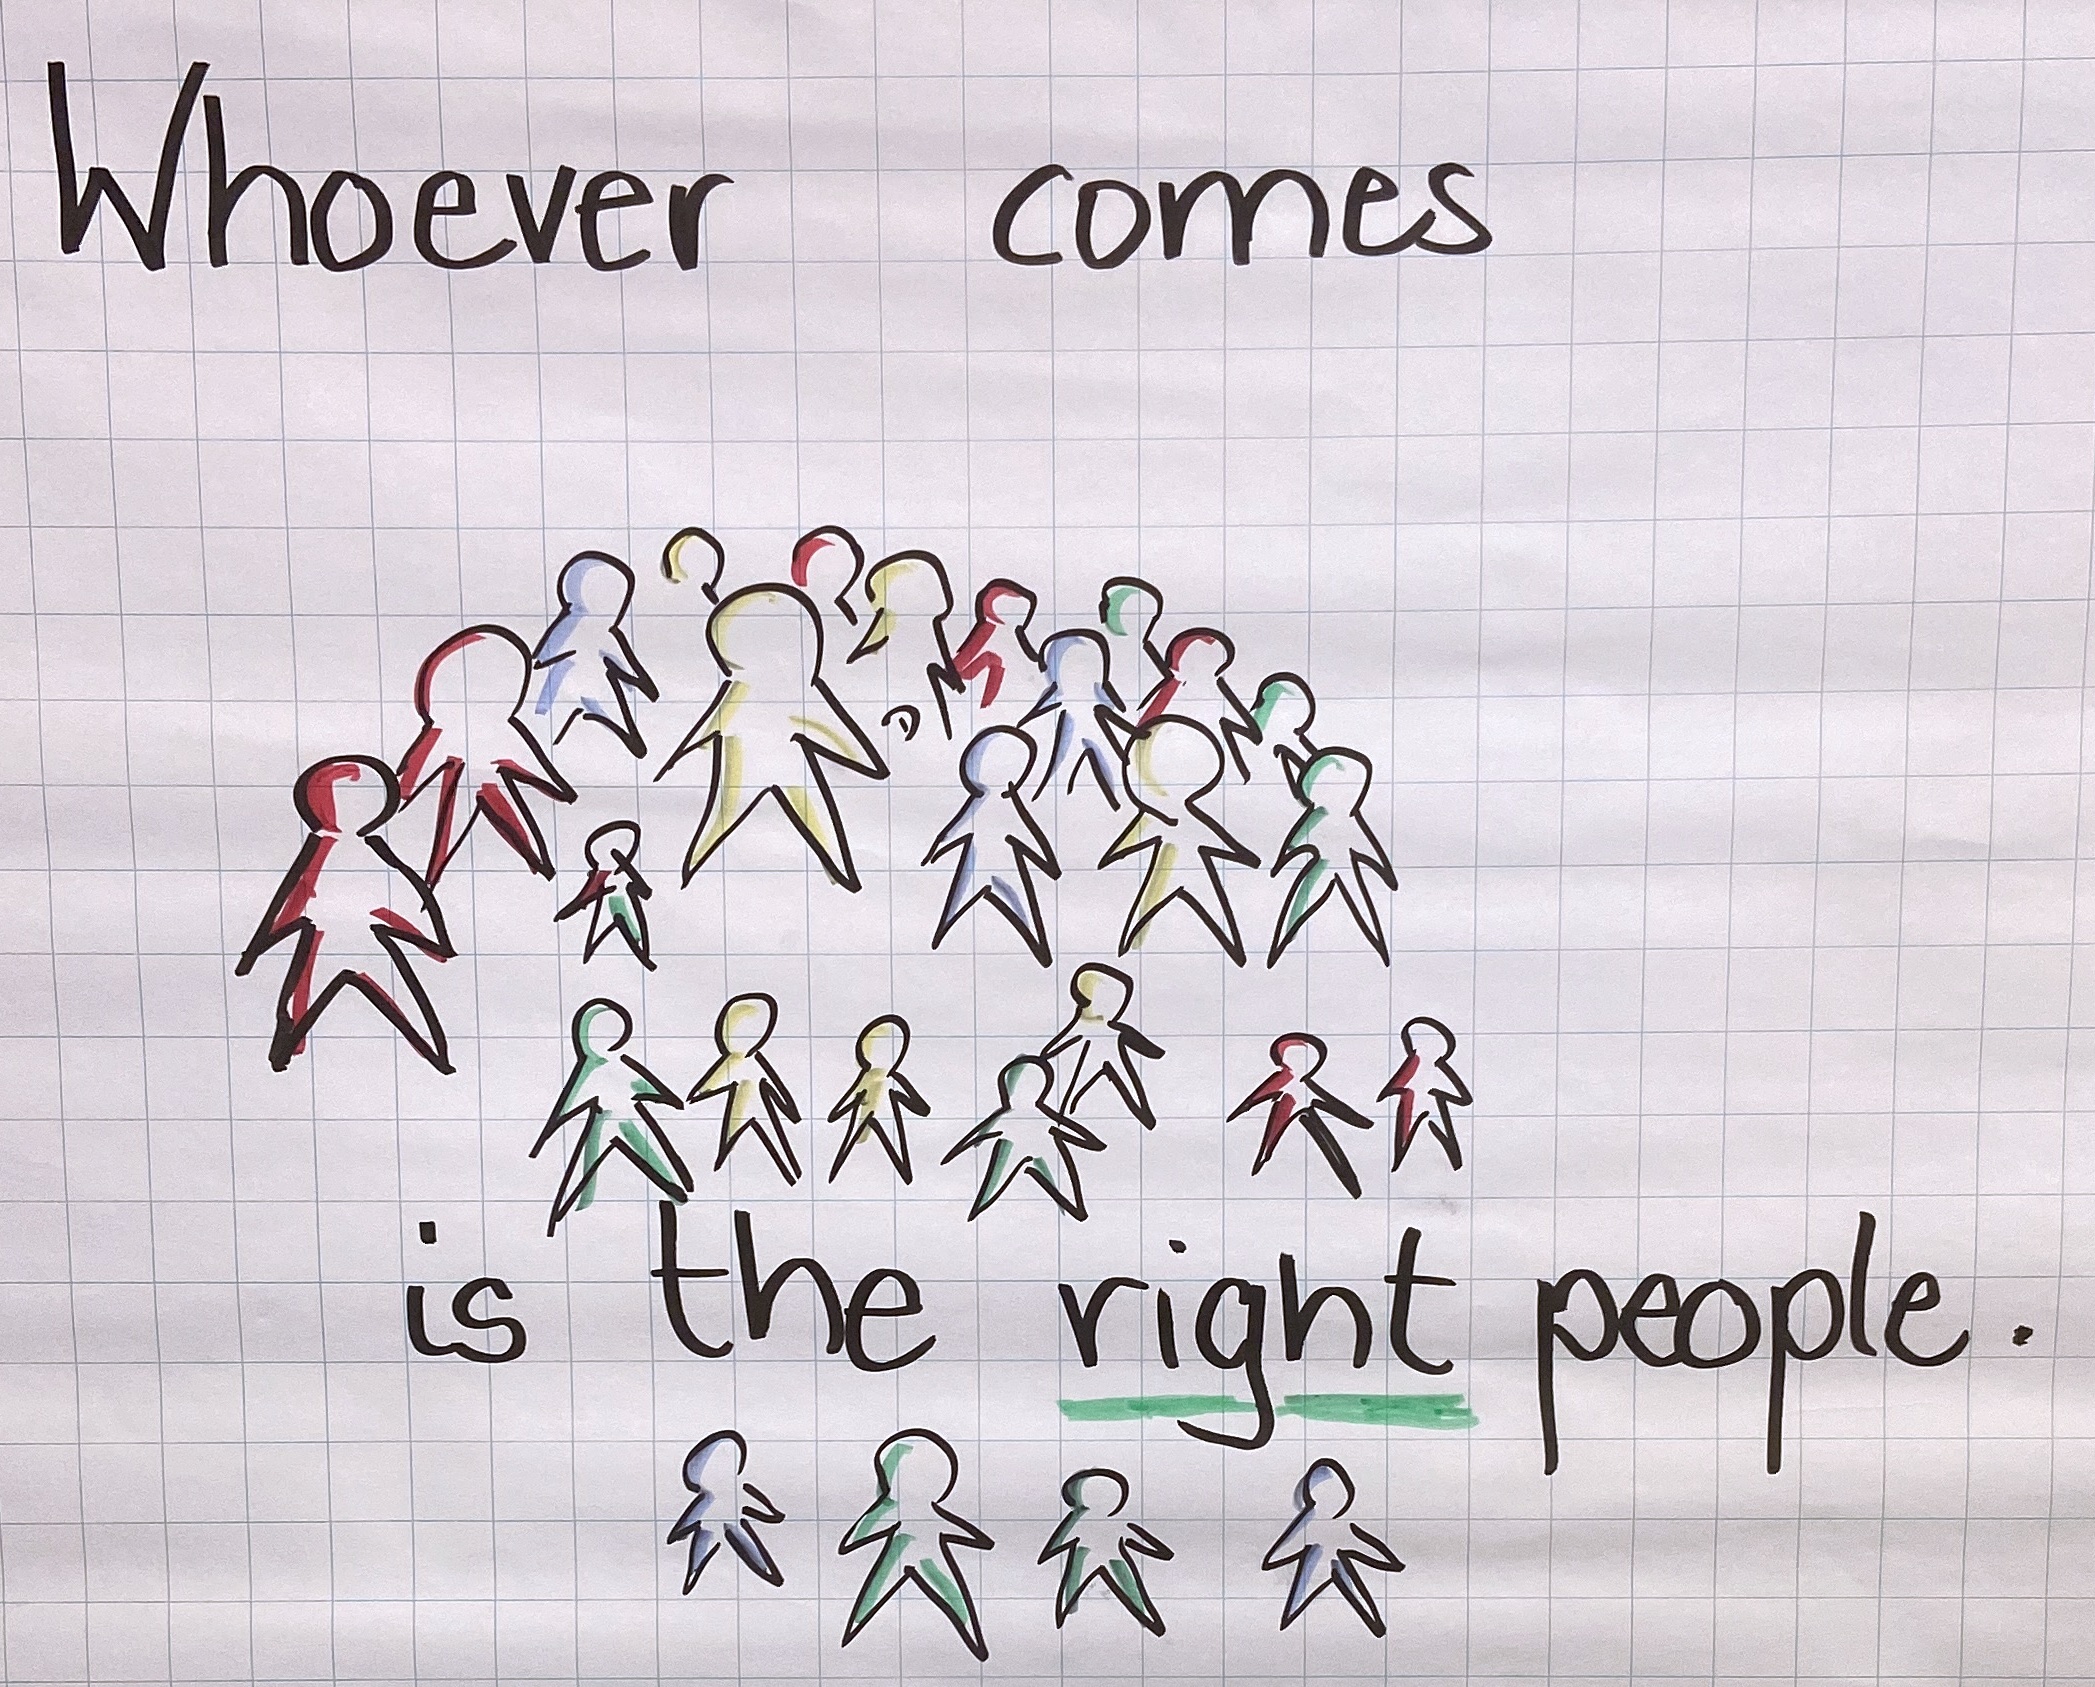 "Whoever comes is the right people"